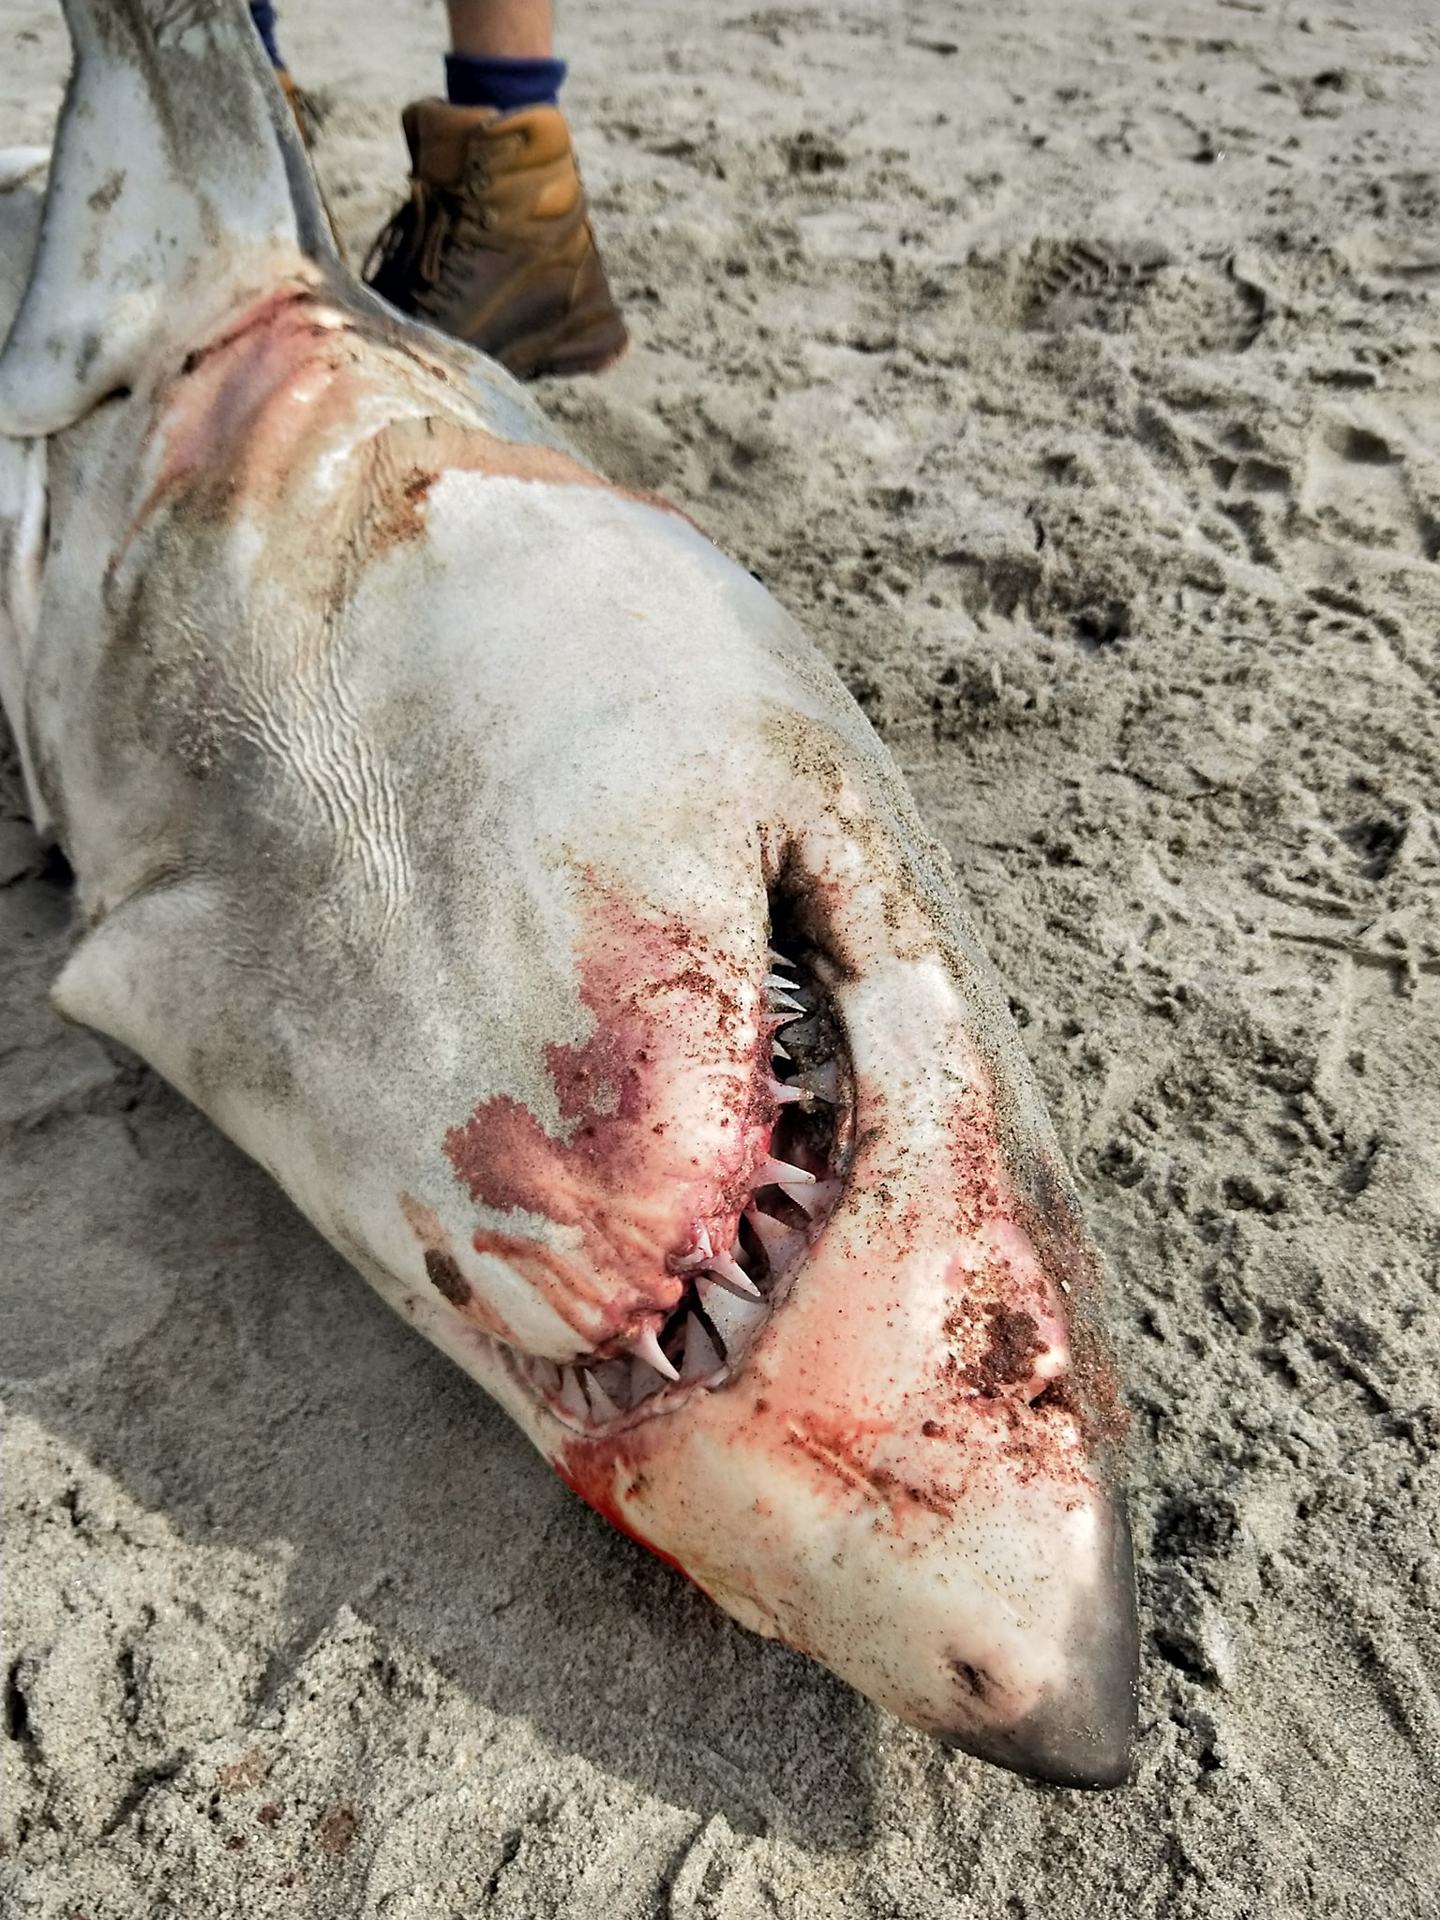 Baby great white shark a rare find on Ninety Mile Beach - NZ Herald